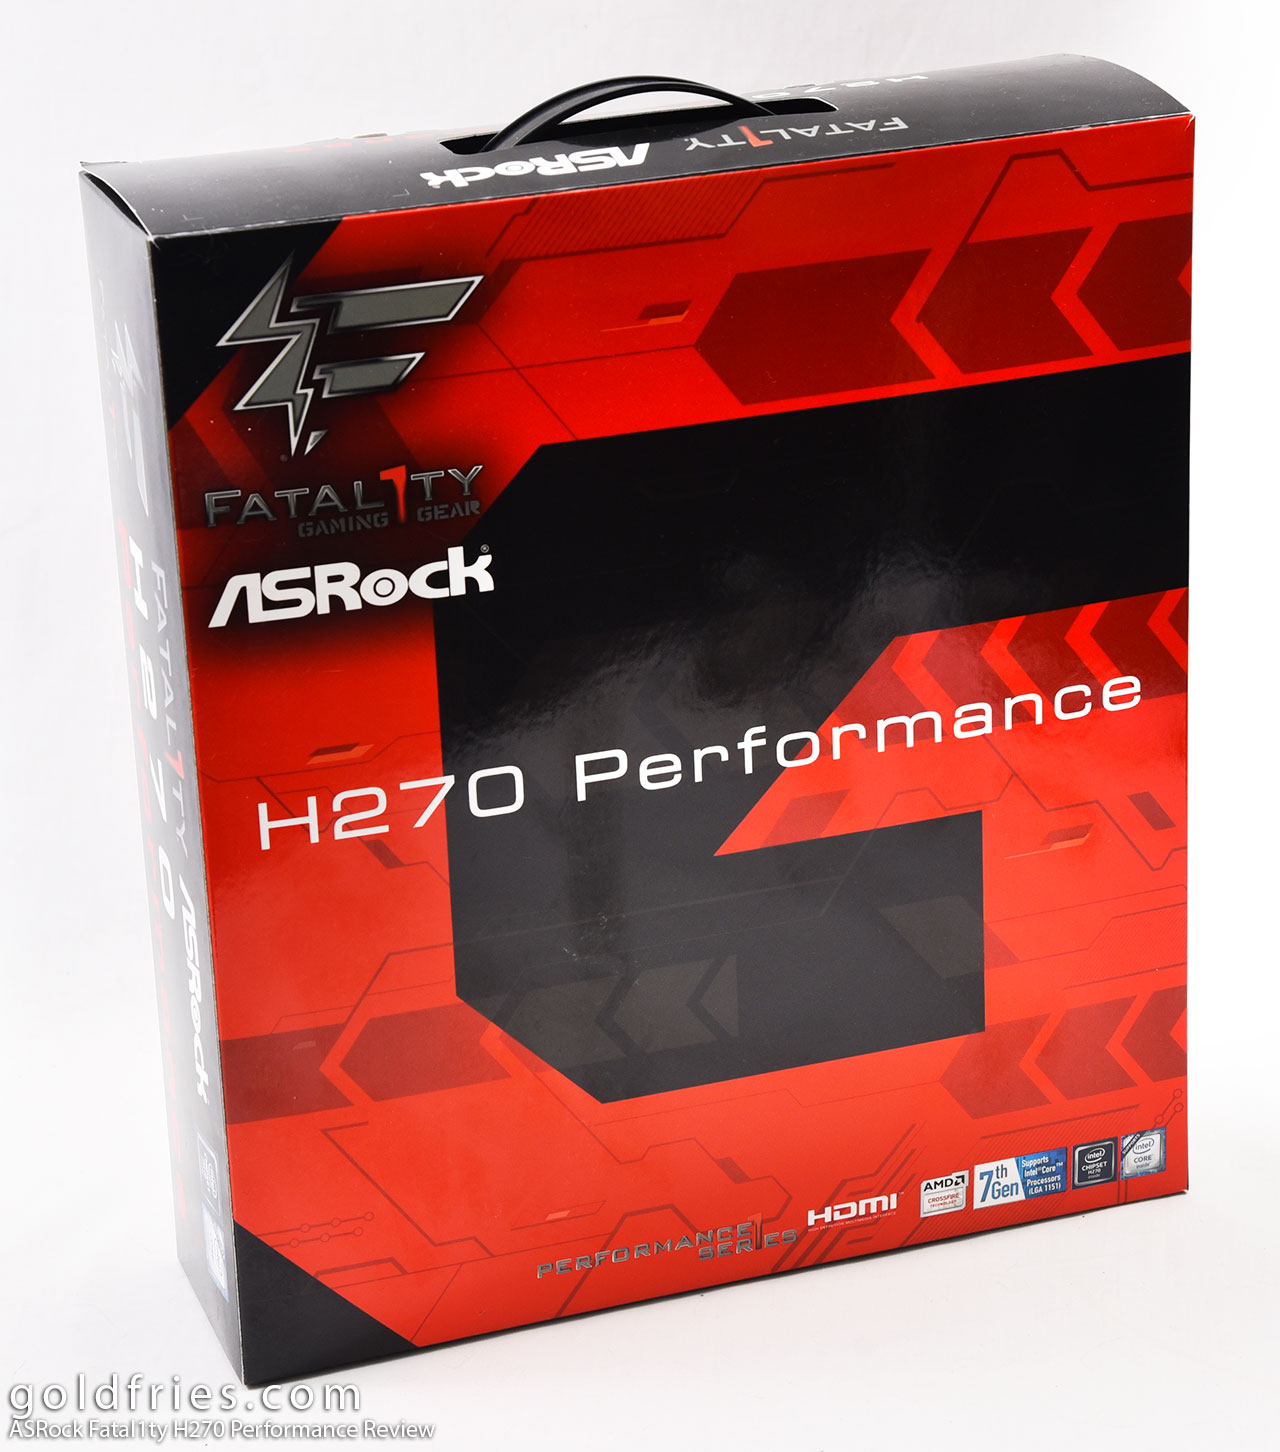 ASRock Fatal1ty H270 Performance Review